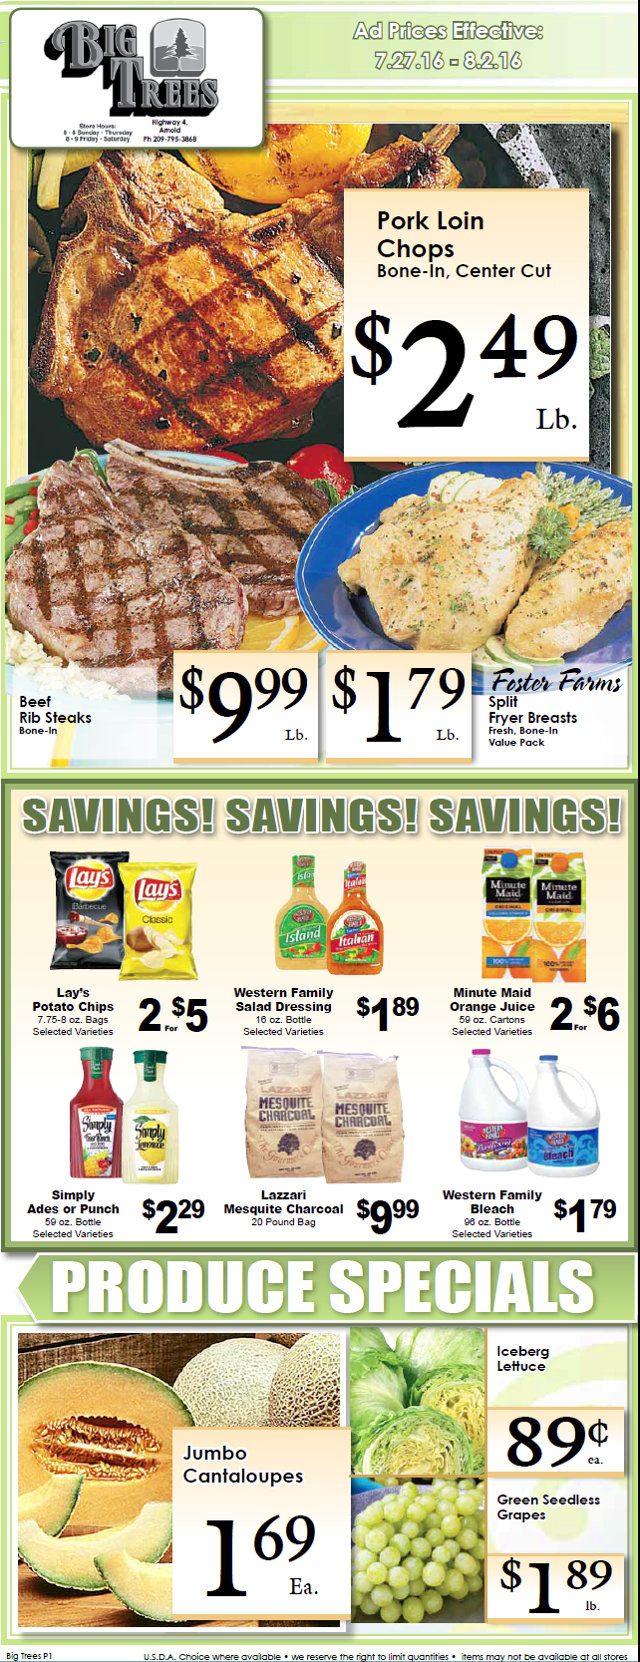 Big Trees Market Weekly Ad & Specials Through August 2nd